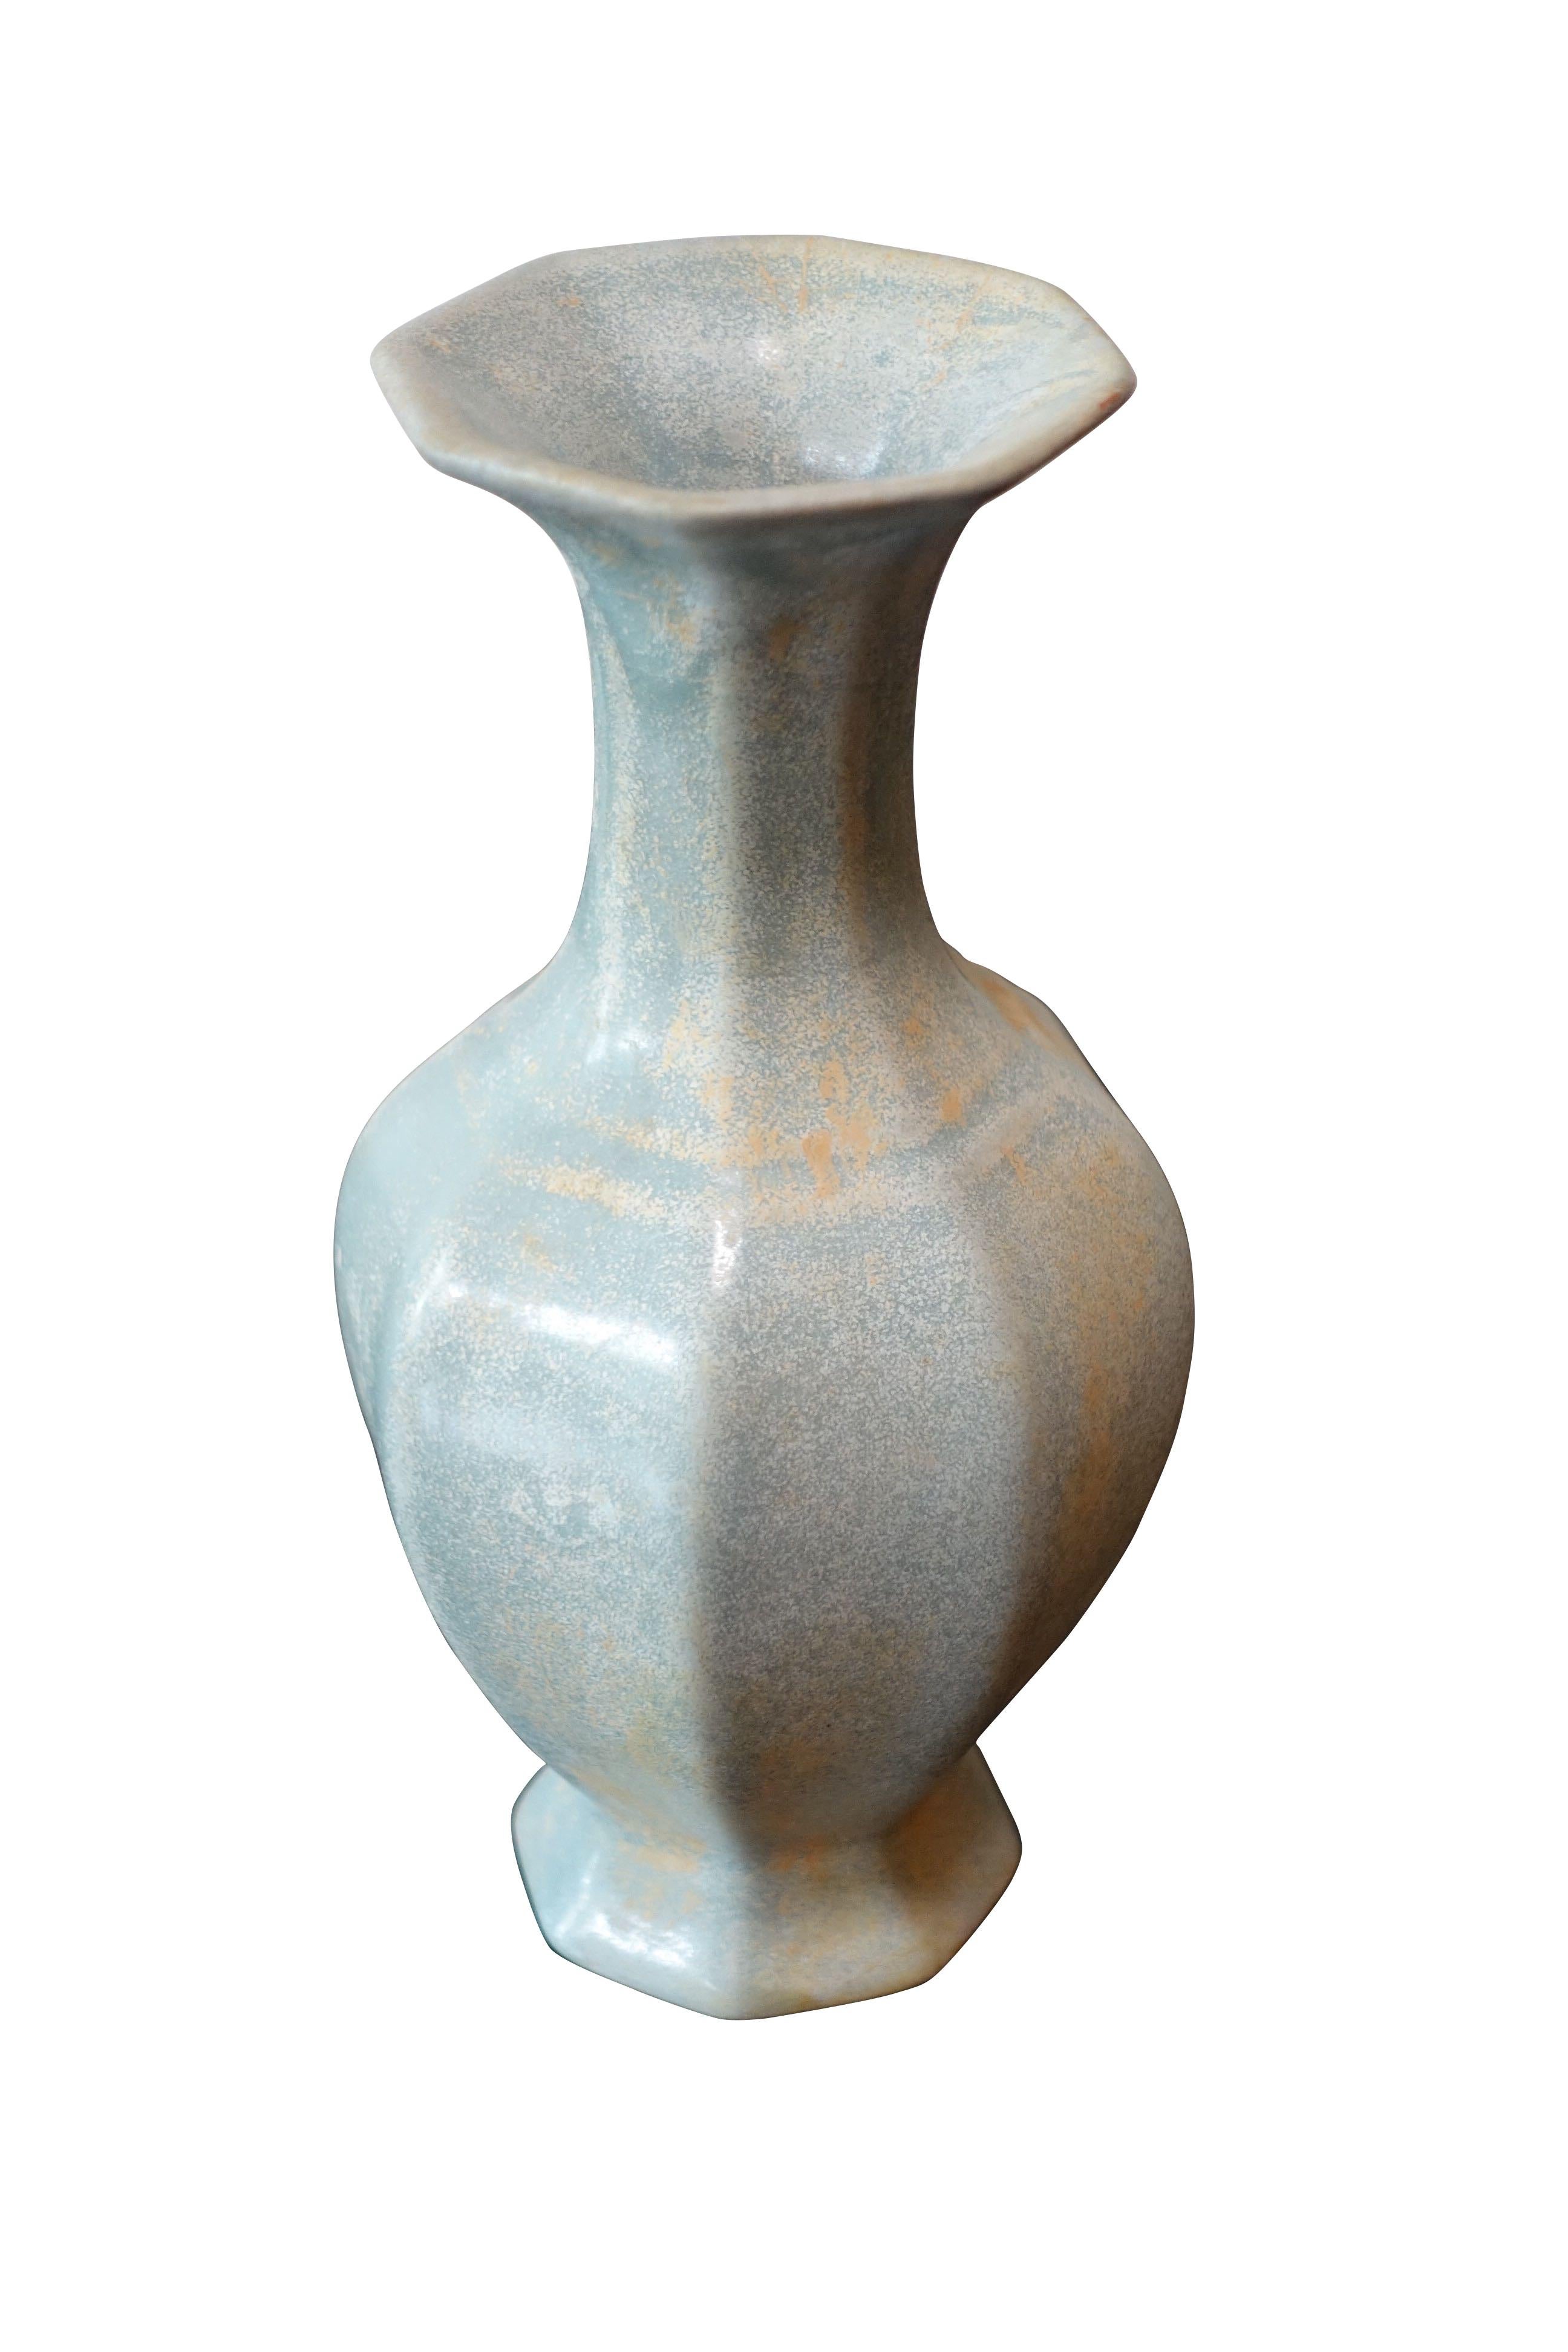 Collection Matte Glaze Pale Turquoise Vases, China, Contemporary 1